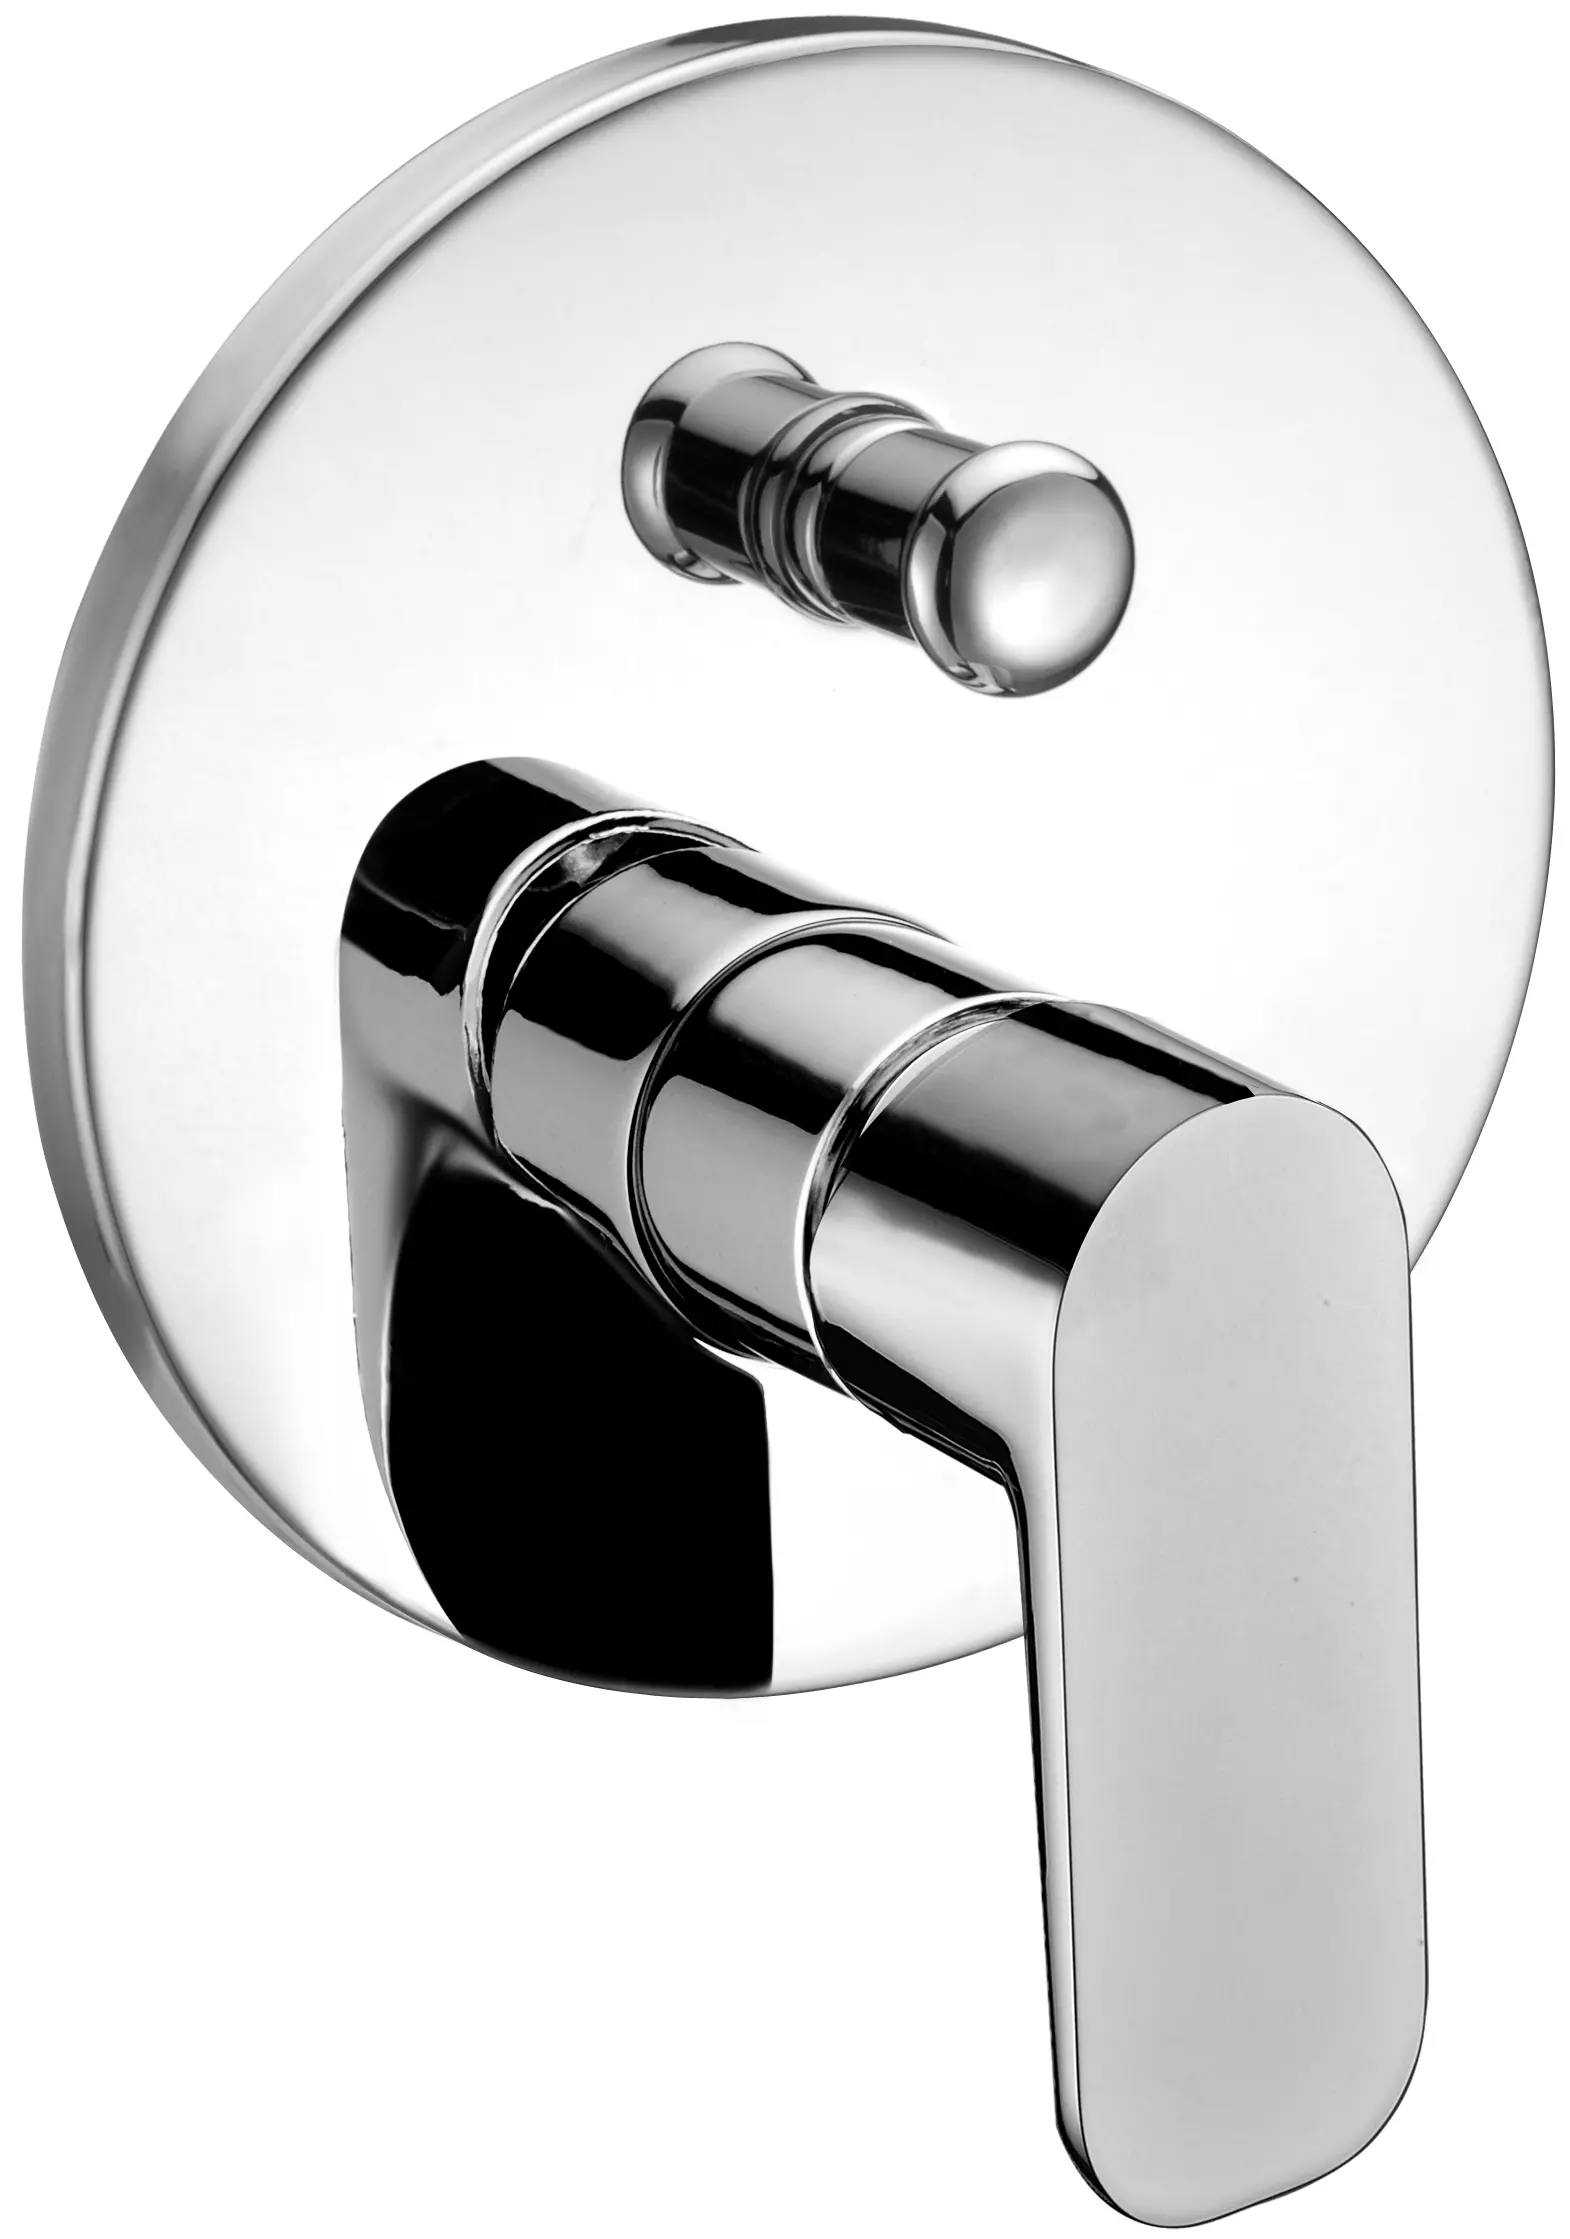 BUILT-IN BATH AND SHOWER MIXER